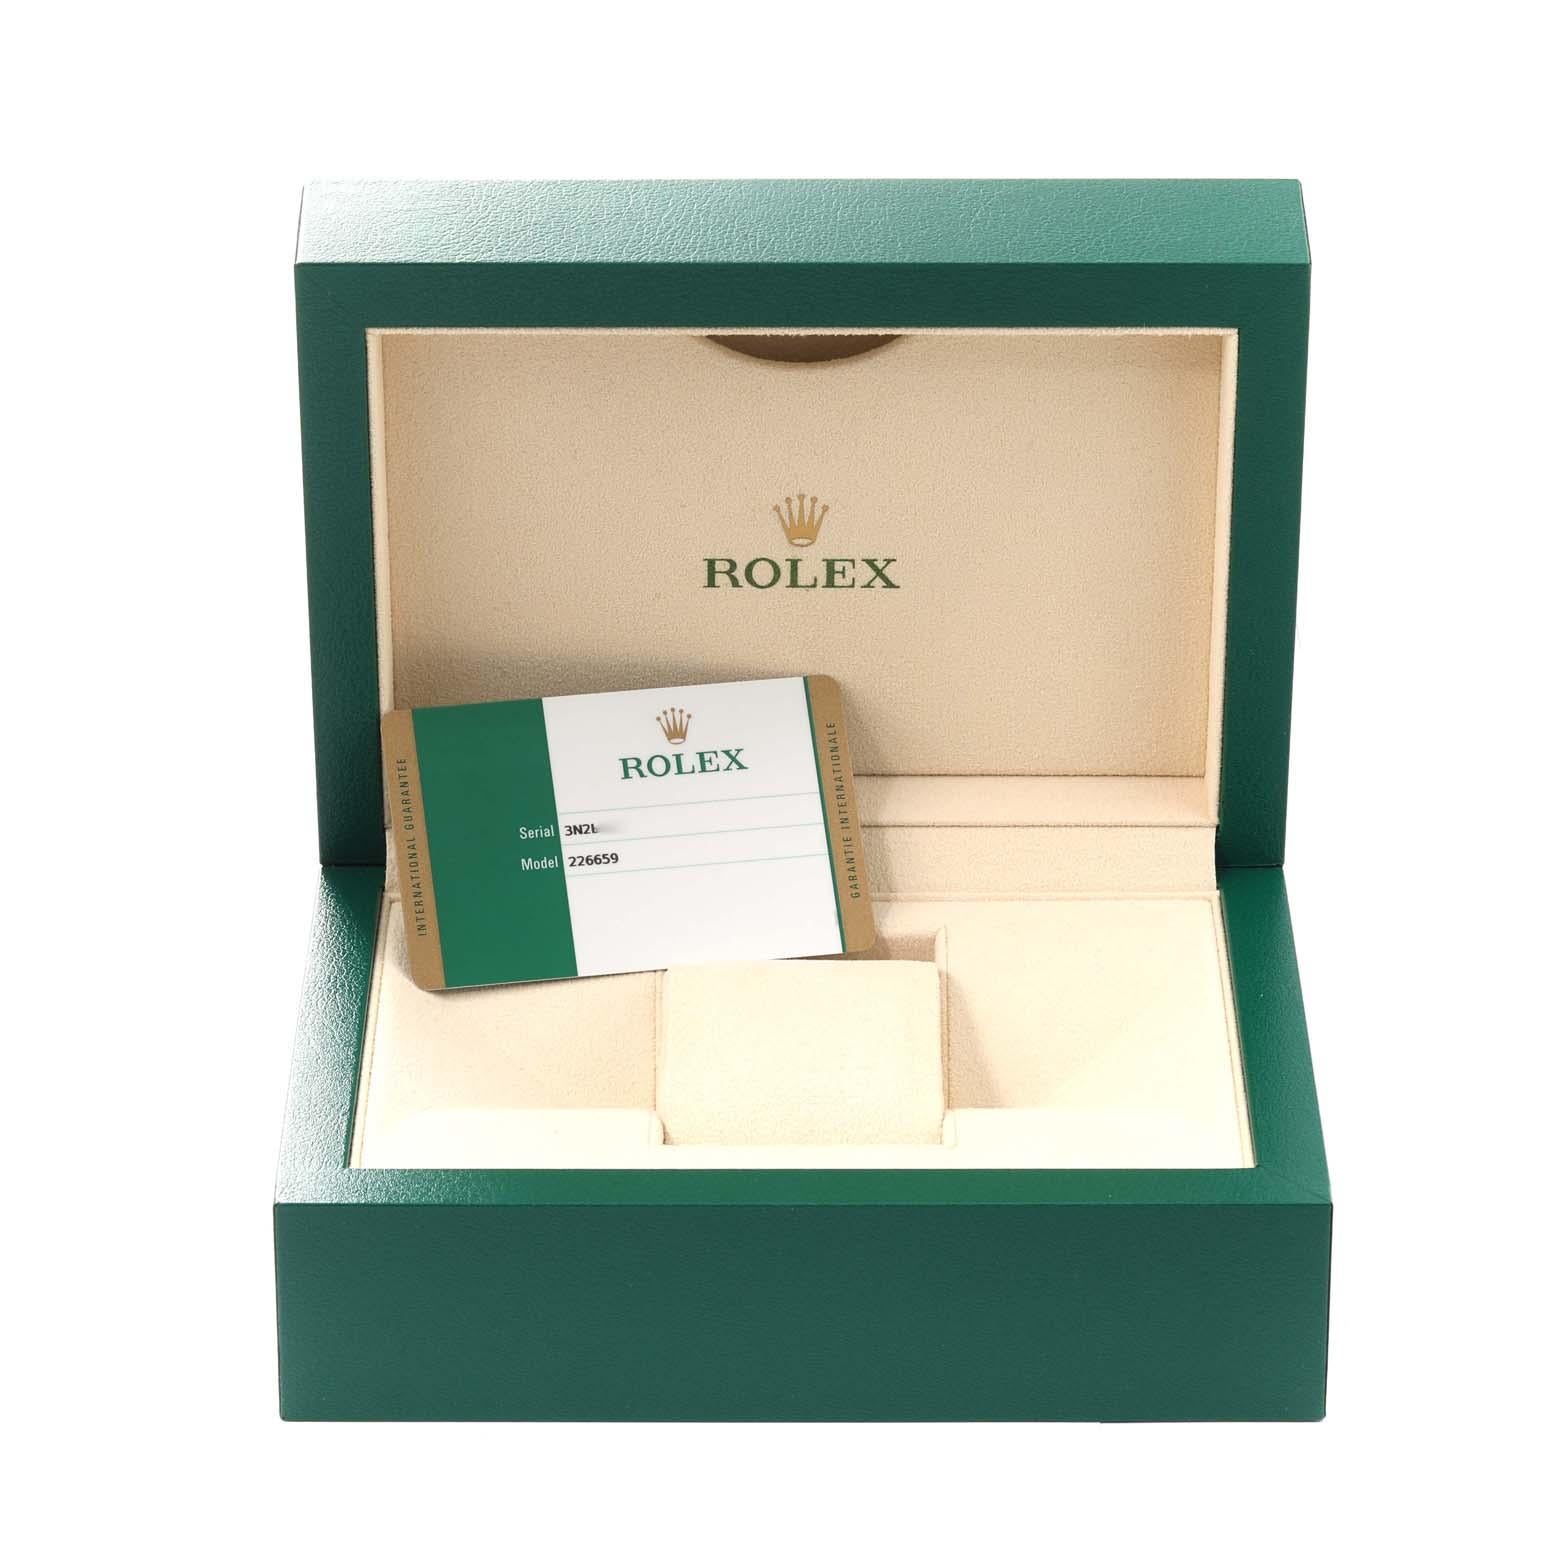 Rolex Yachtmaster White Gold Oysterflex Bracelet Mens Watch 226659 Box Card For Sale 4